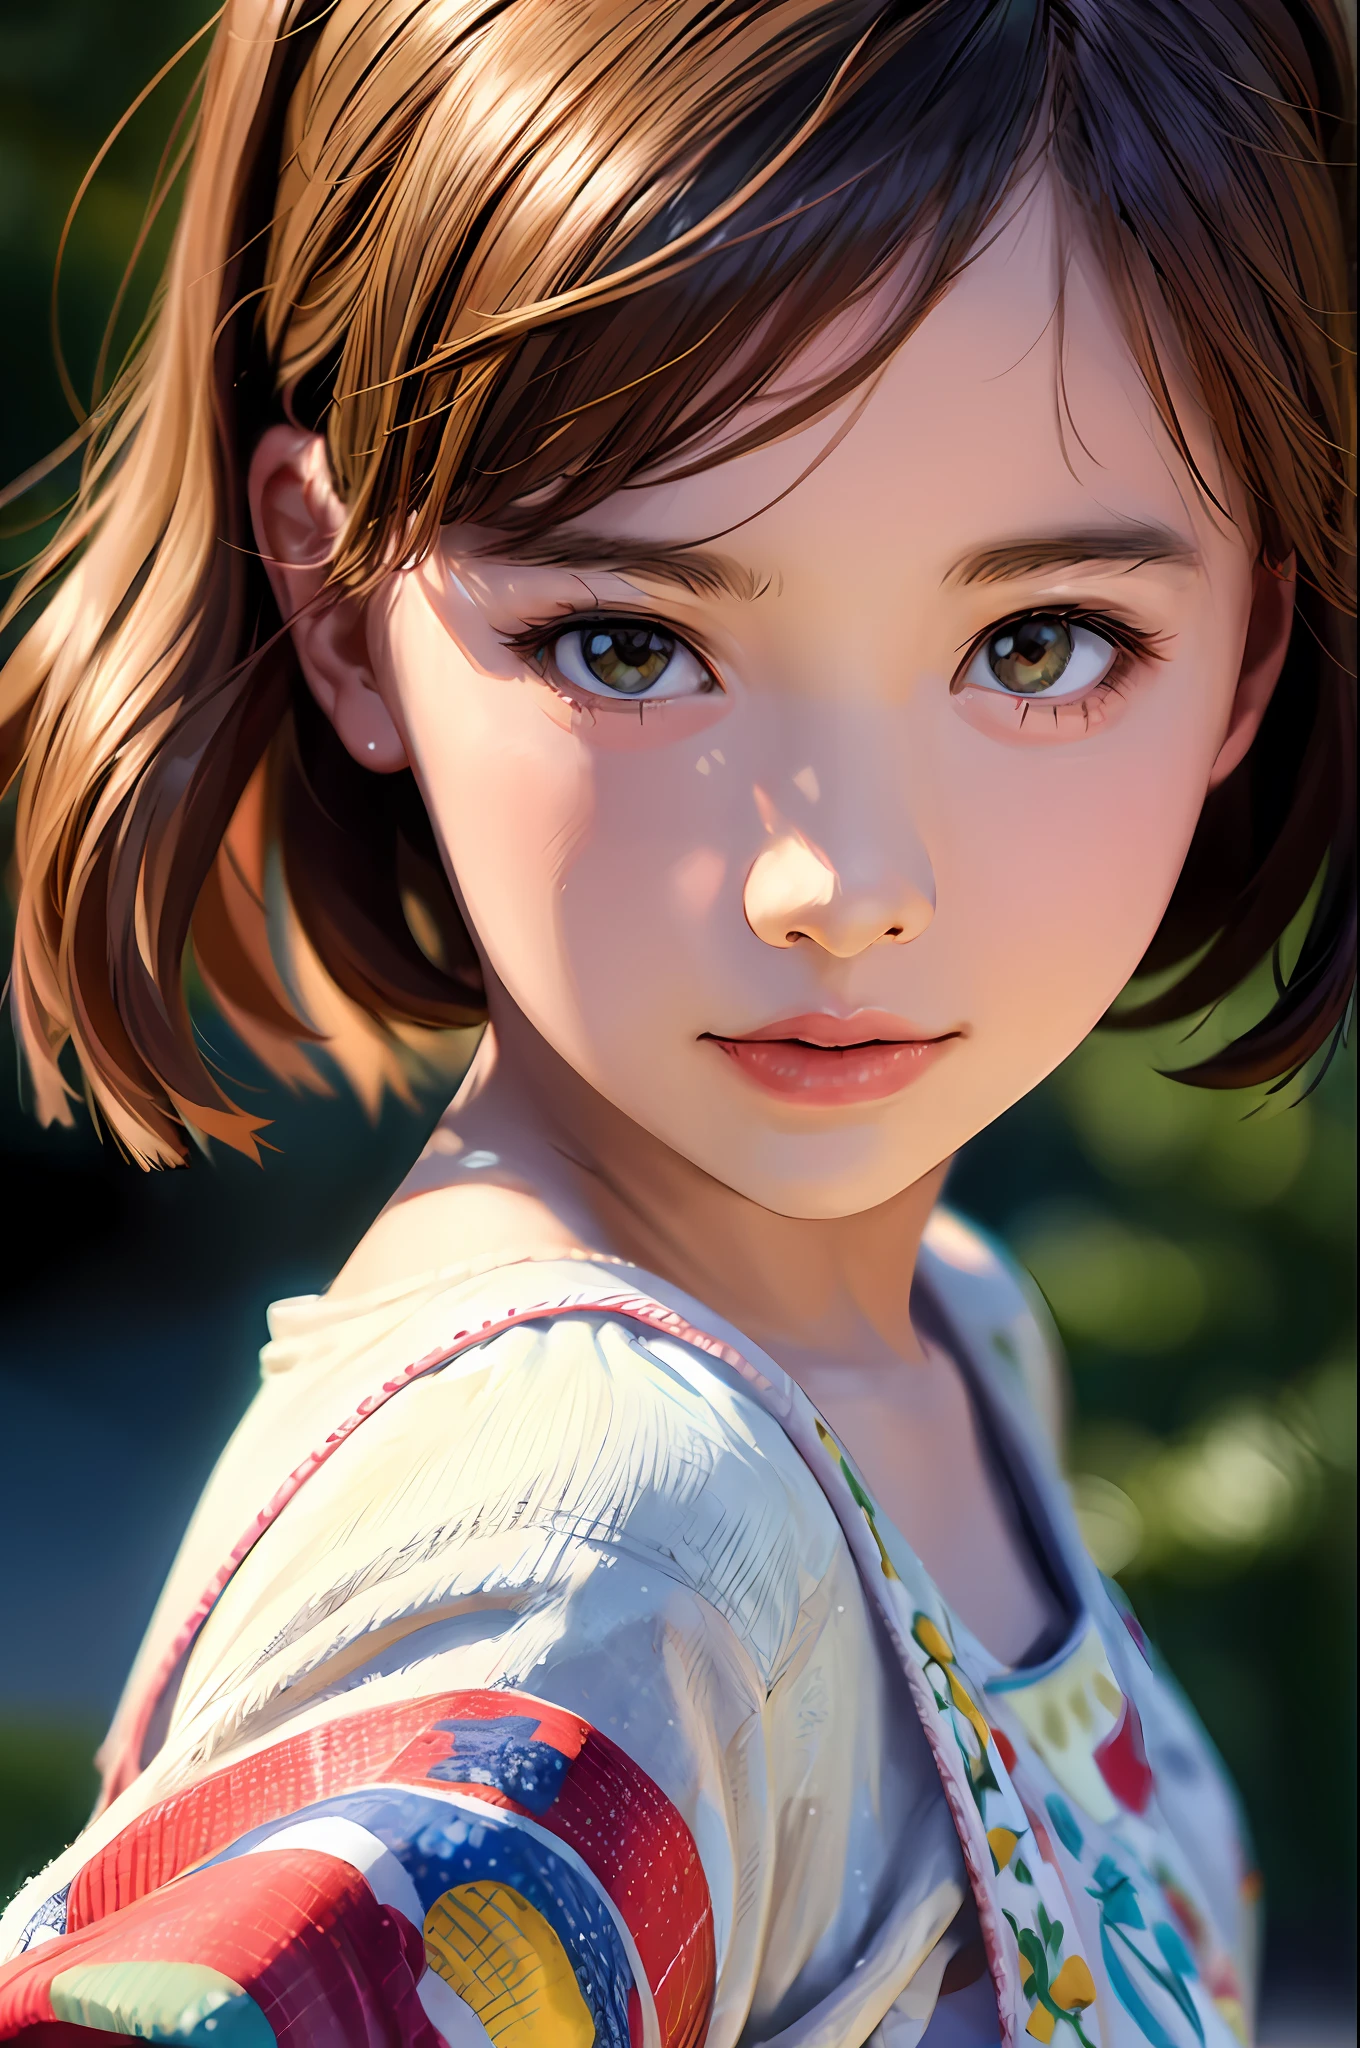 Young girl with short hair, colorful shirt and red and white striped shirt, Japan teenage portrait, soft portrait shot 8k, girl cute-fine face, beautiful Japan girl face, close up of young anime girl, portrait cute-fine face, portrait of Japan girl, beautiful young girl, beautiful bright big eyes, cute young girl